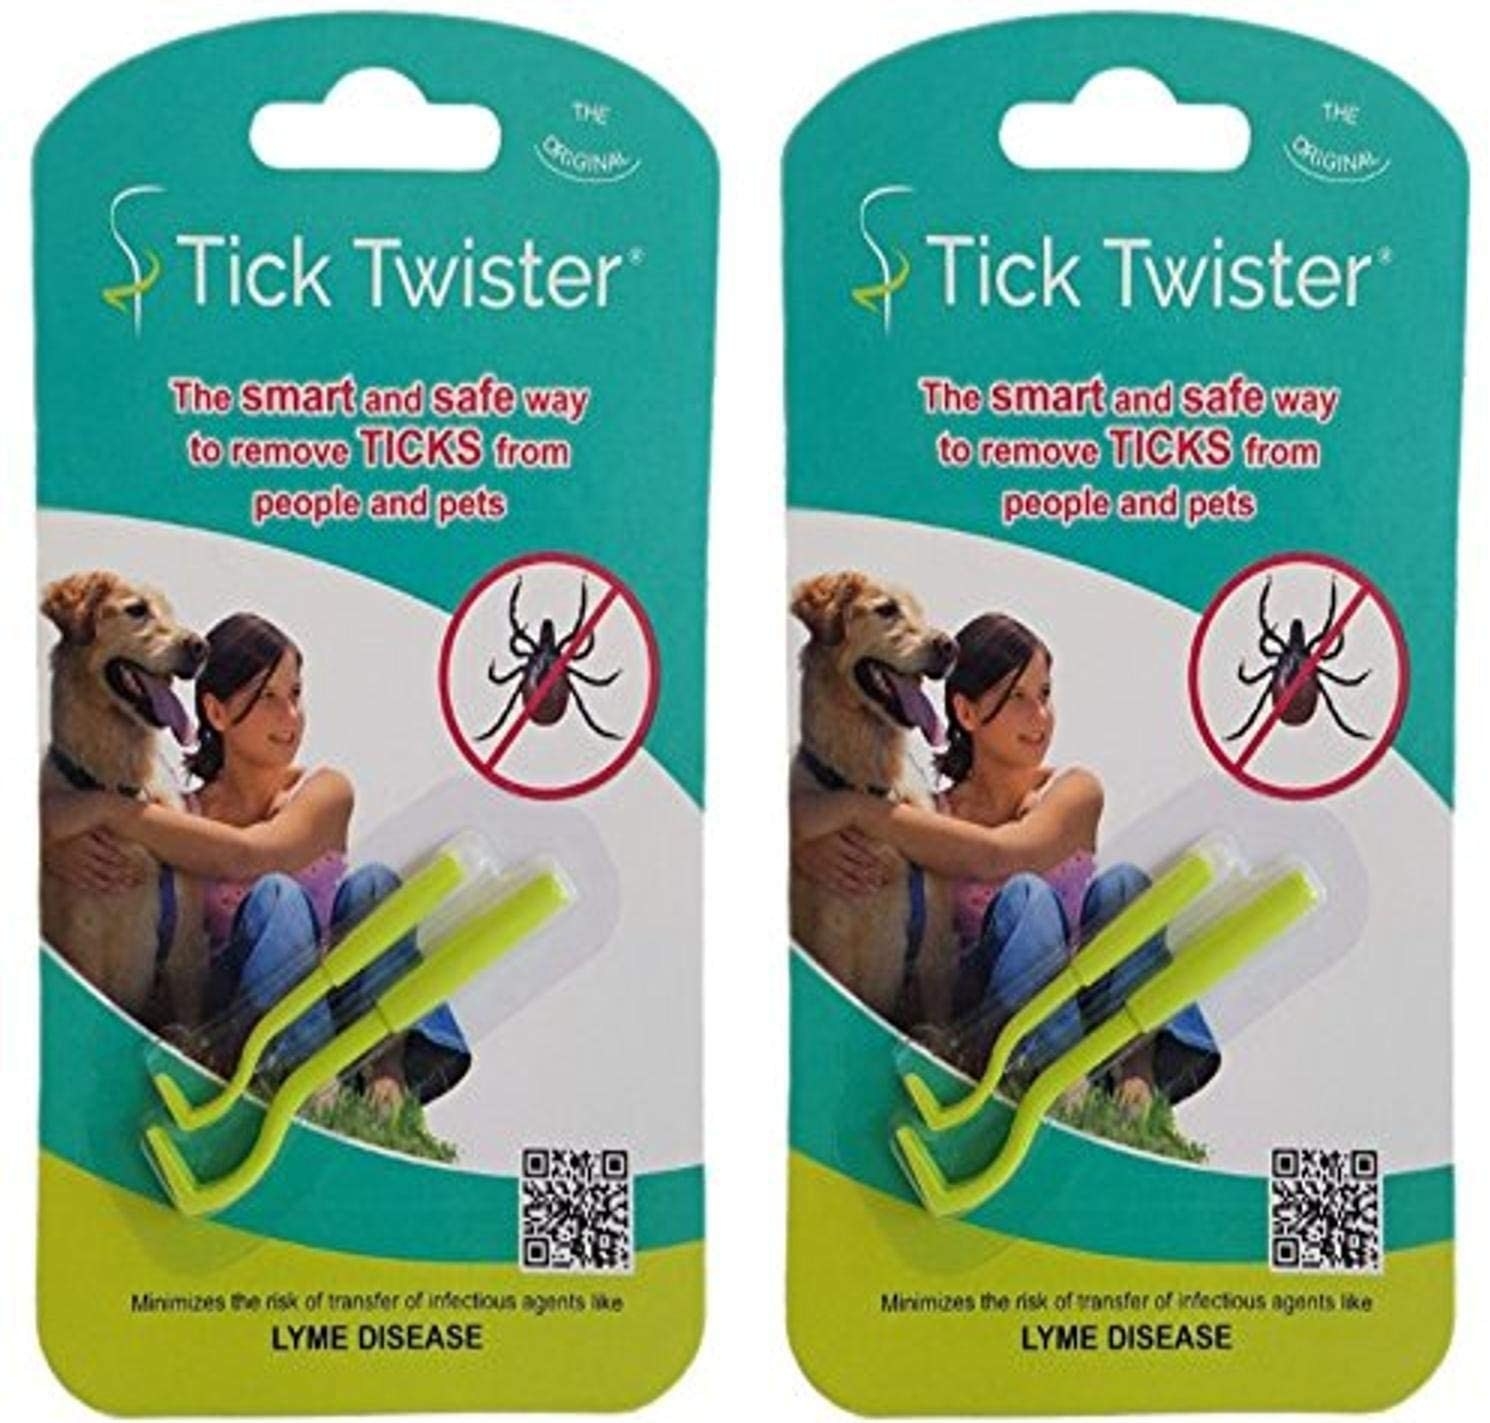 Lime green and teal packaging of tick-removing tweezers